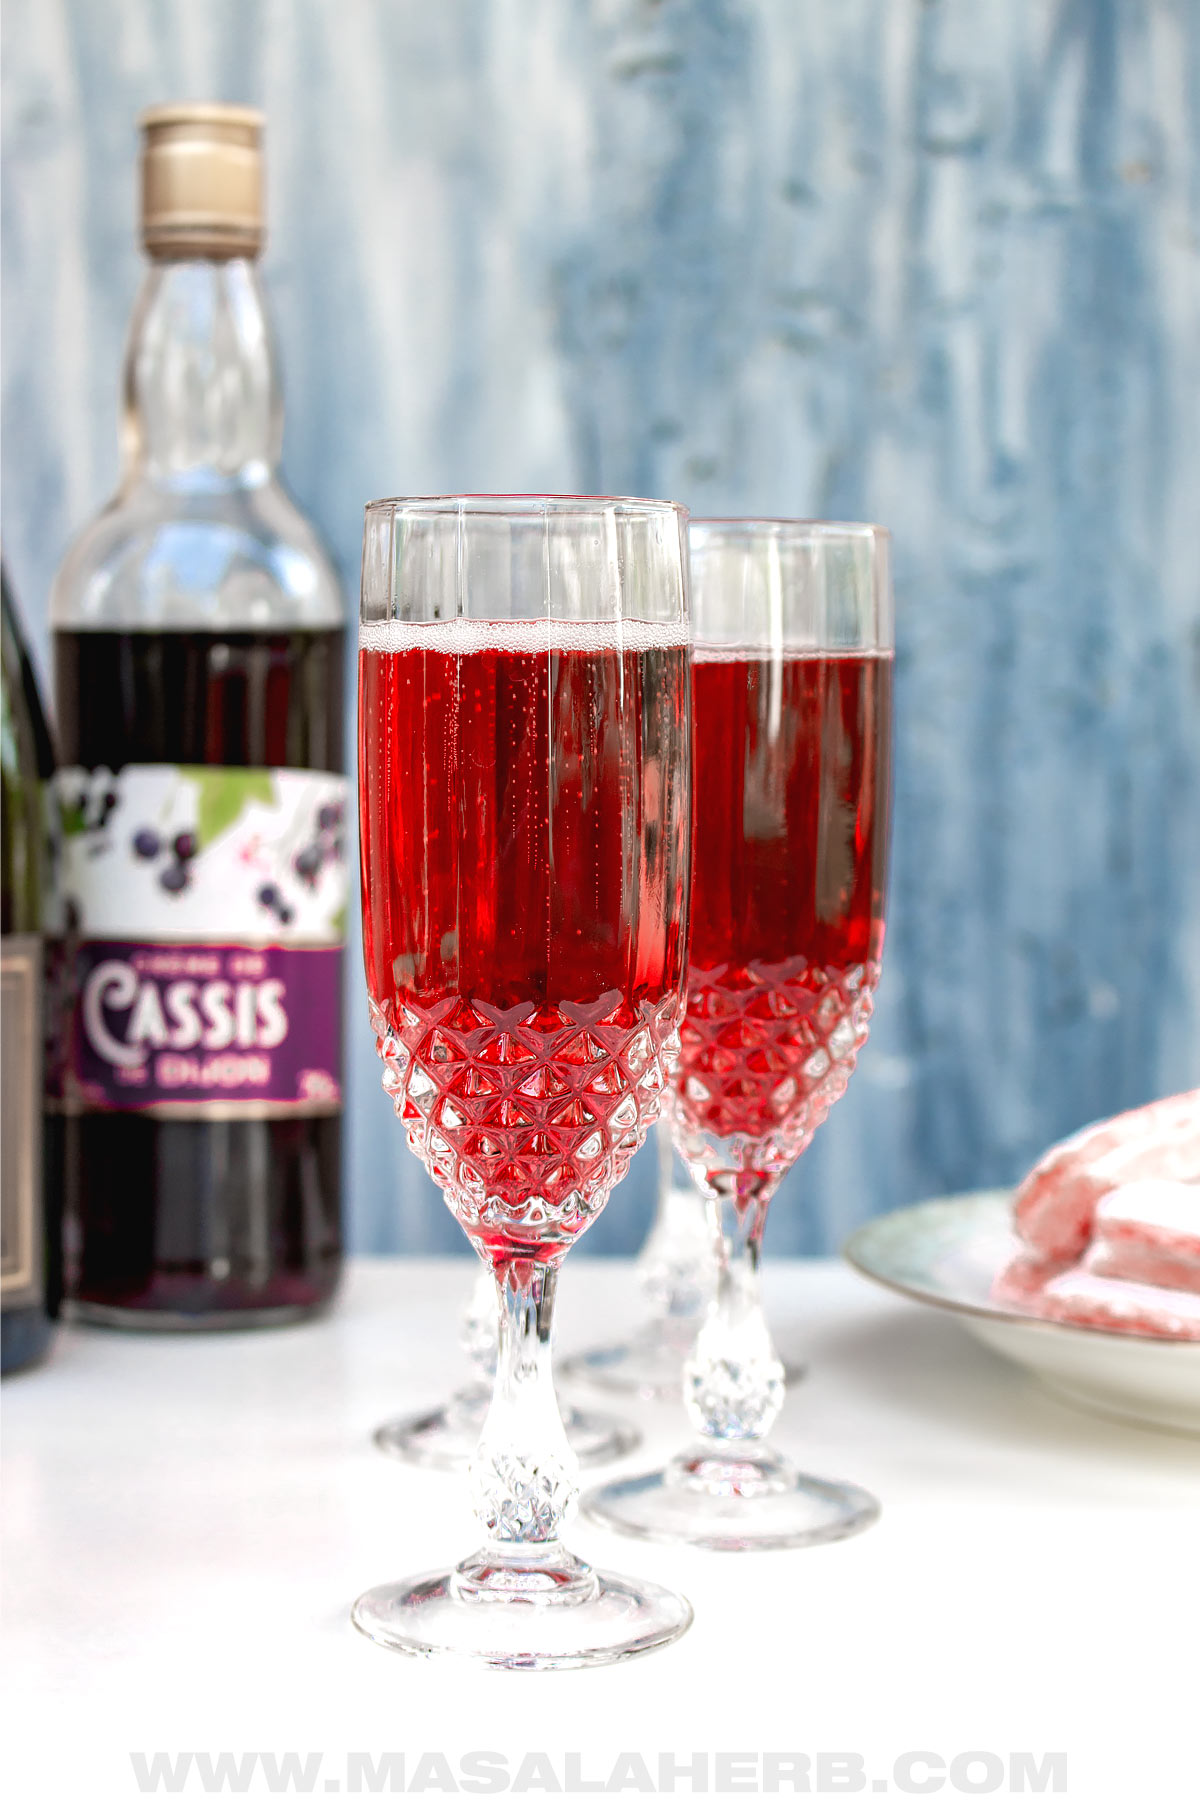 kir royale cocktail in a flute